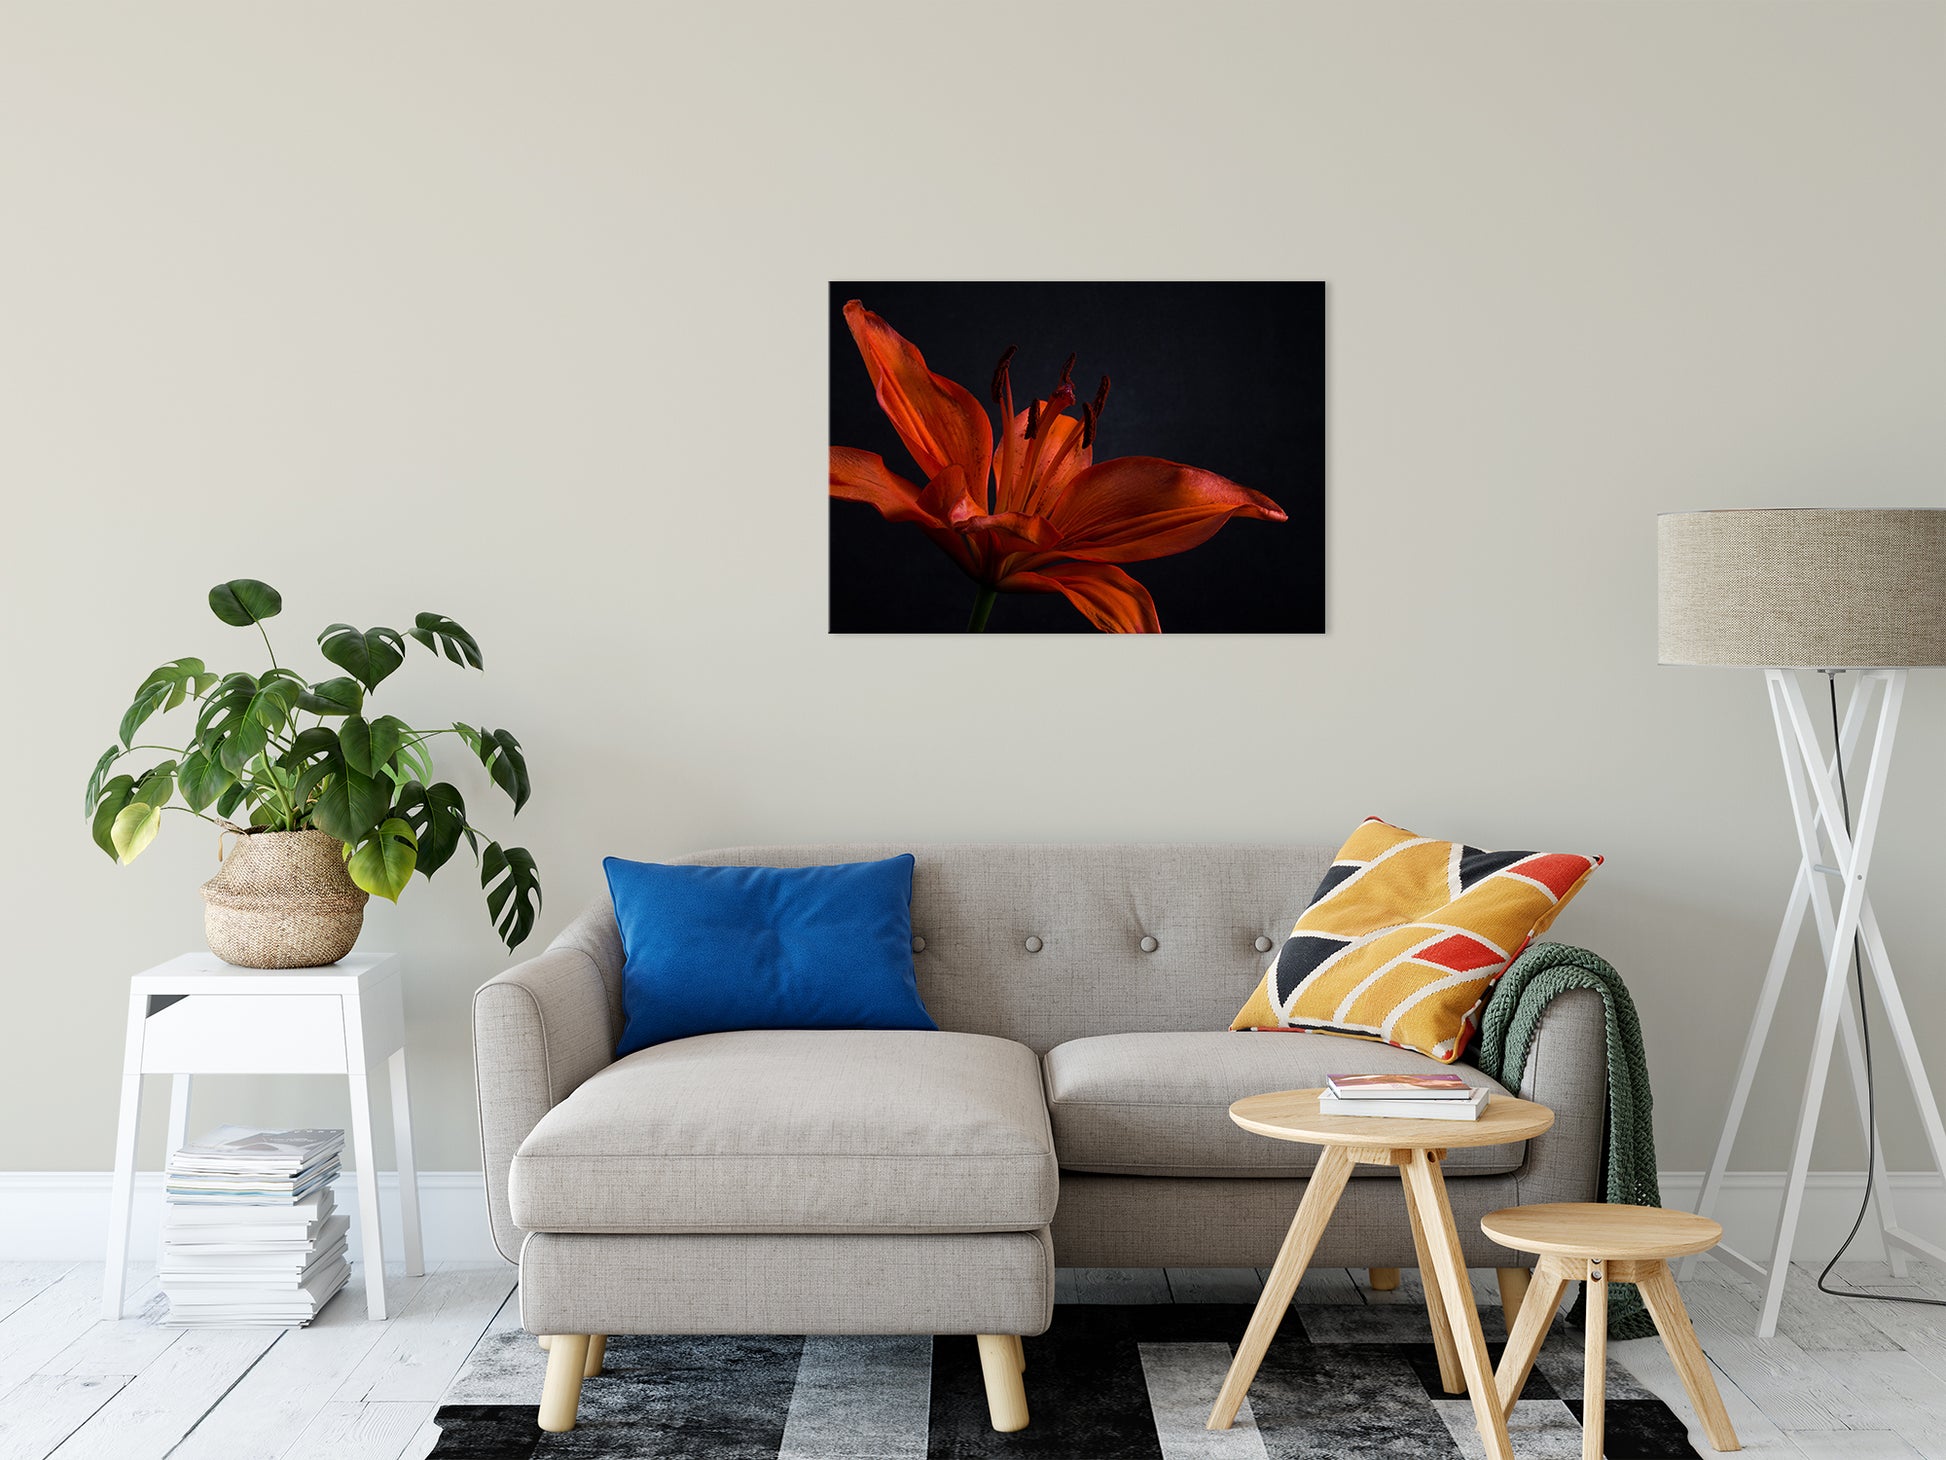 Orange Lily with Backlight Nature / Floral Photo Fine Art Canvas Wall Art Prints 24" x 36" - PIPAFINEART